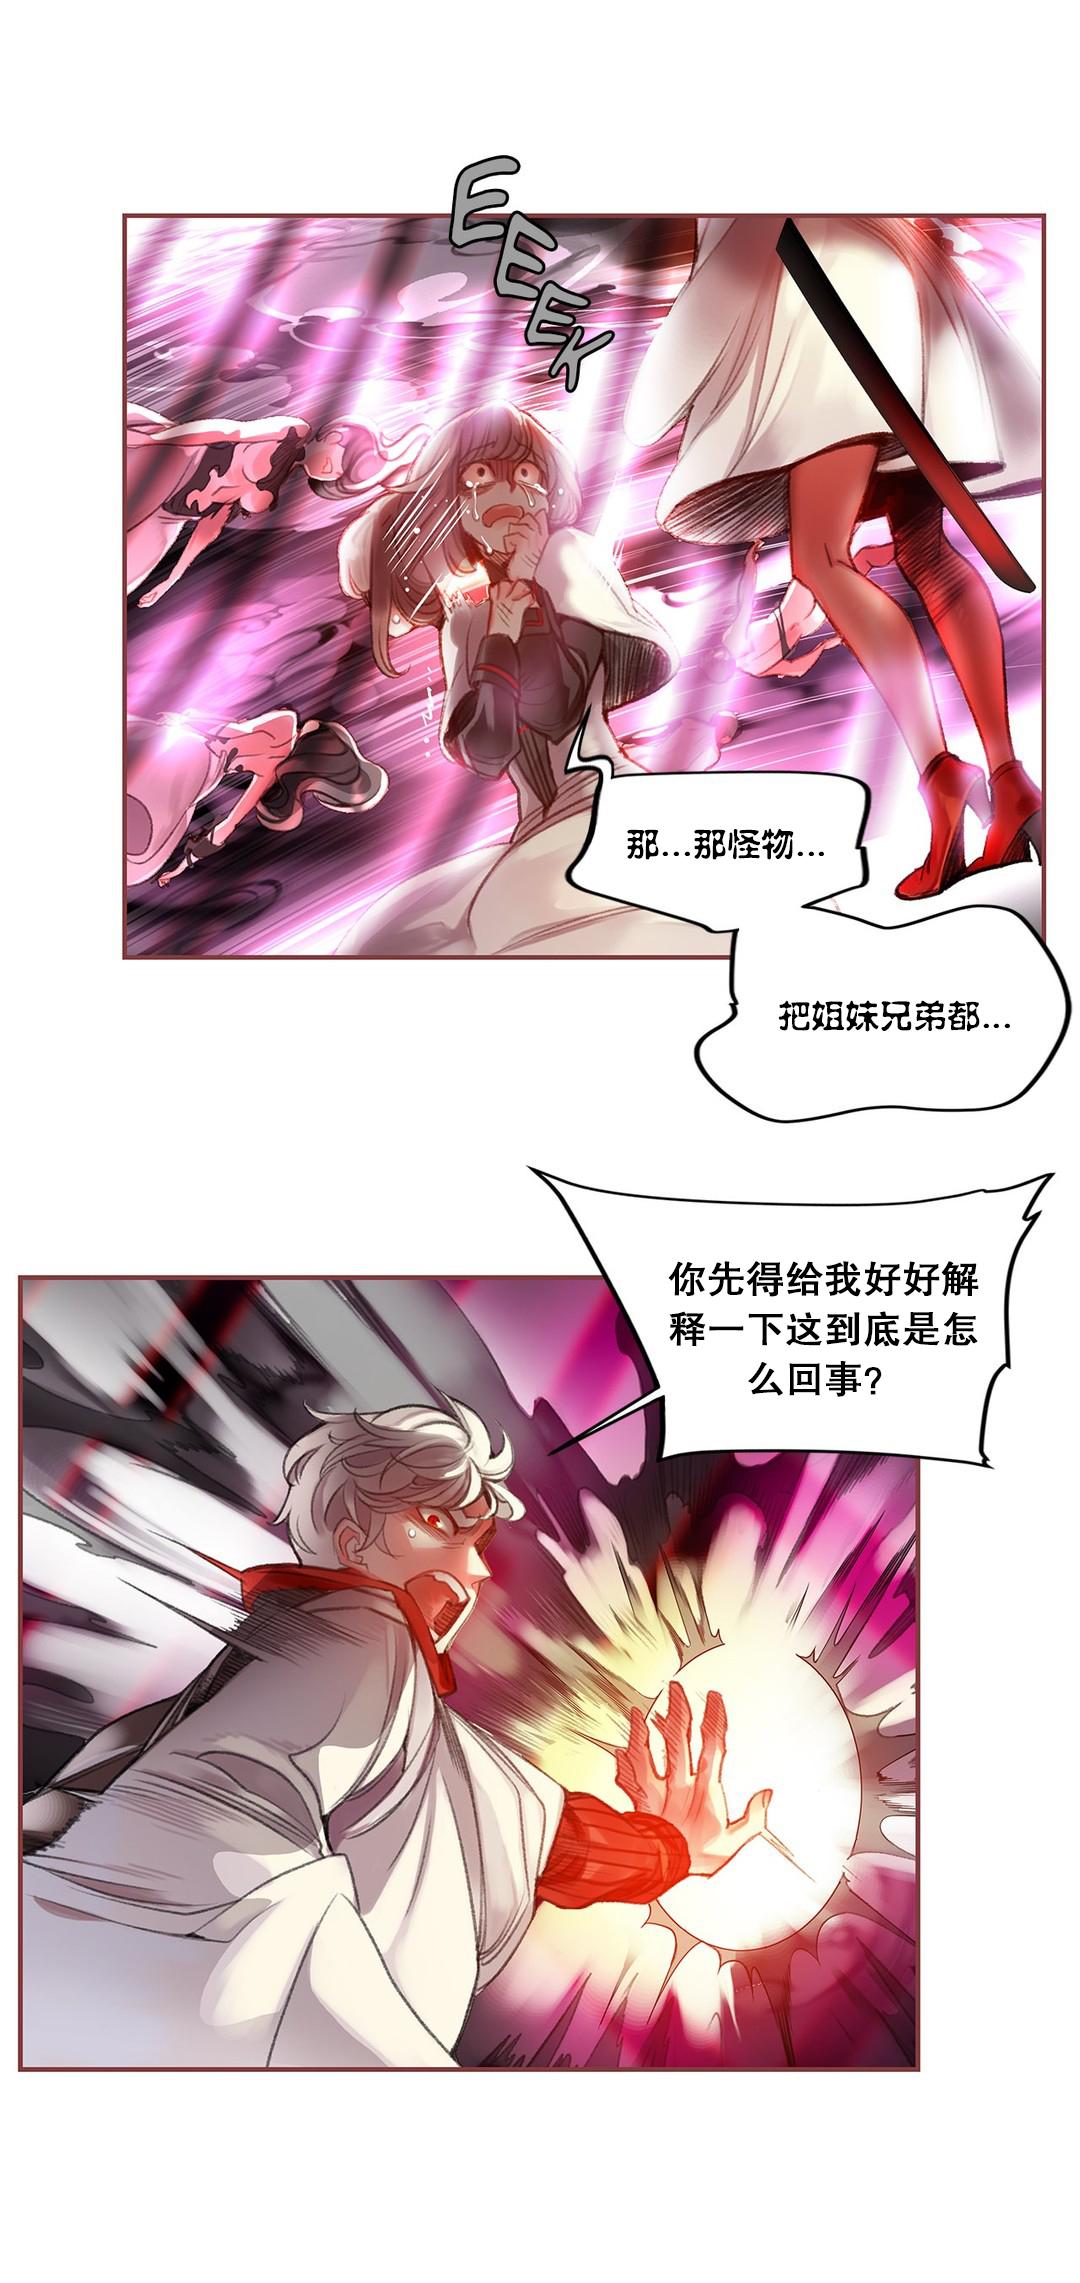 [Juder] Lilith`s Cord (第二季) Ch.61-64 [Chinese] [aaatwist个人汉化] [Ongoing] 22